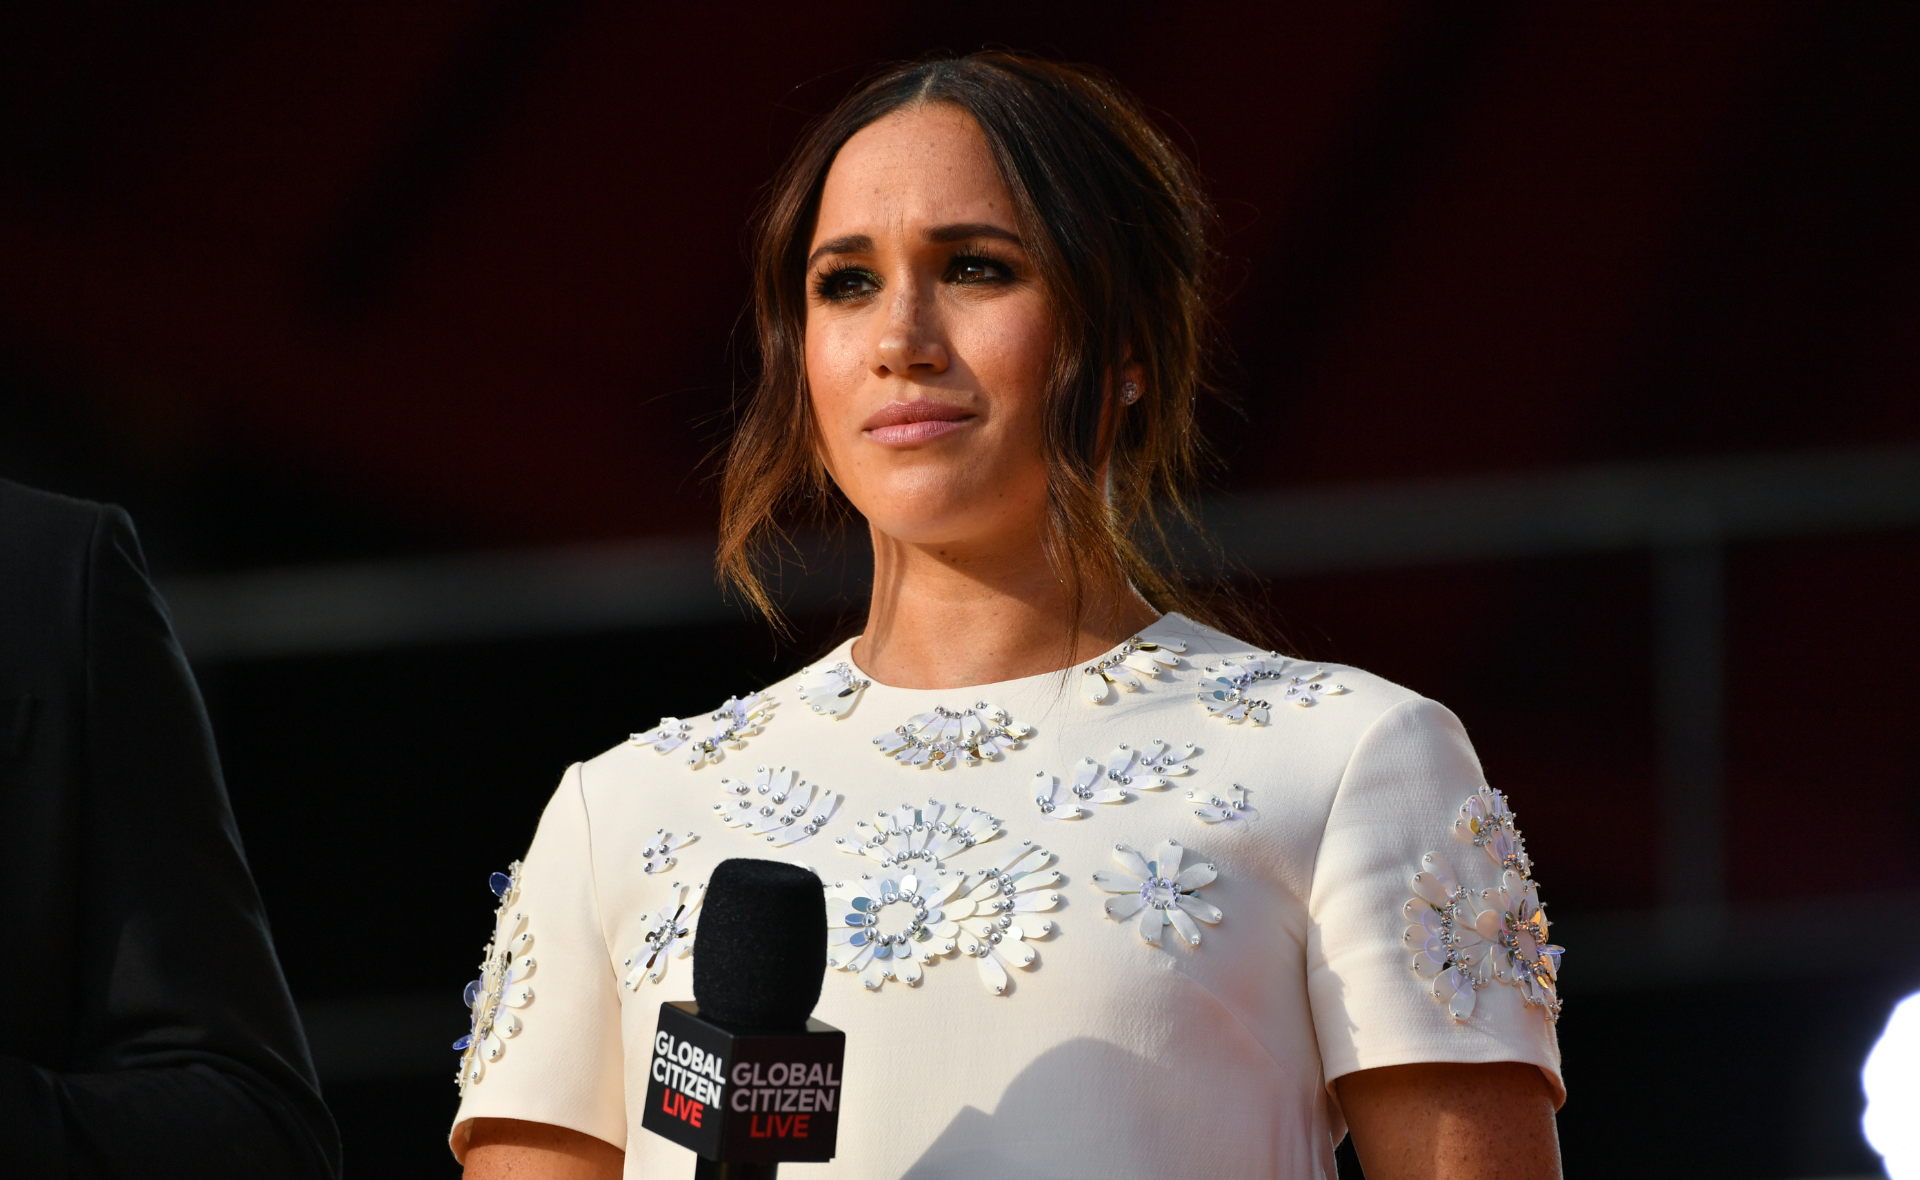 Archetypes guest suggests Meghan Markle doesn’t do the interviews on her podcast